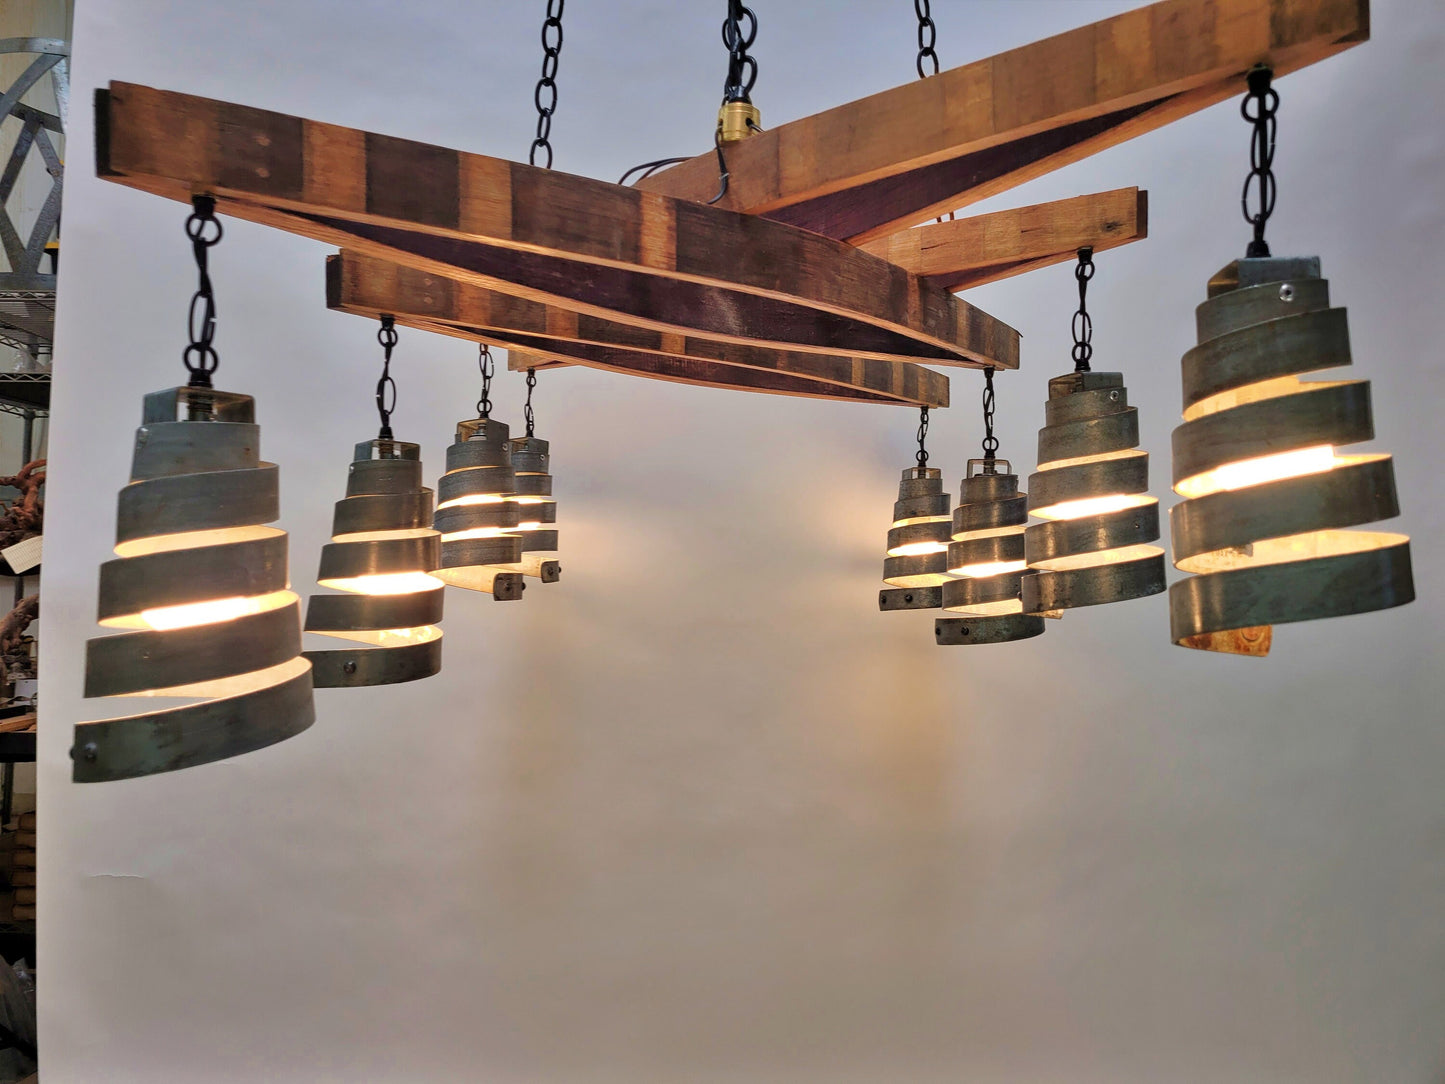 Wine Barrel Stave Chandelier - Cutat - Made from retired California Wine Barrels + Rings - 100% Recycled!